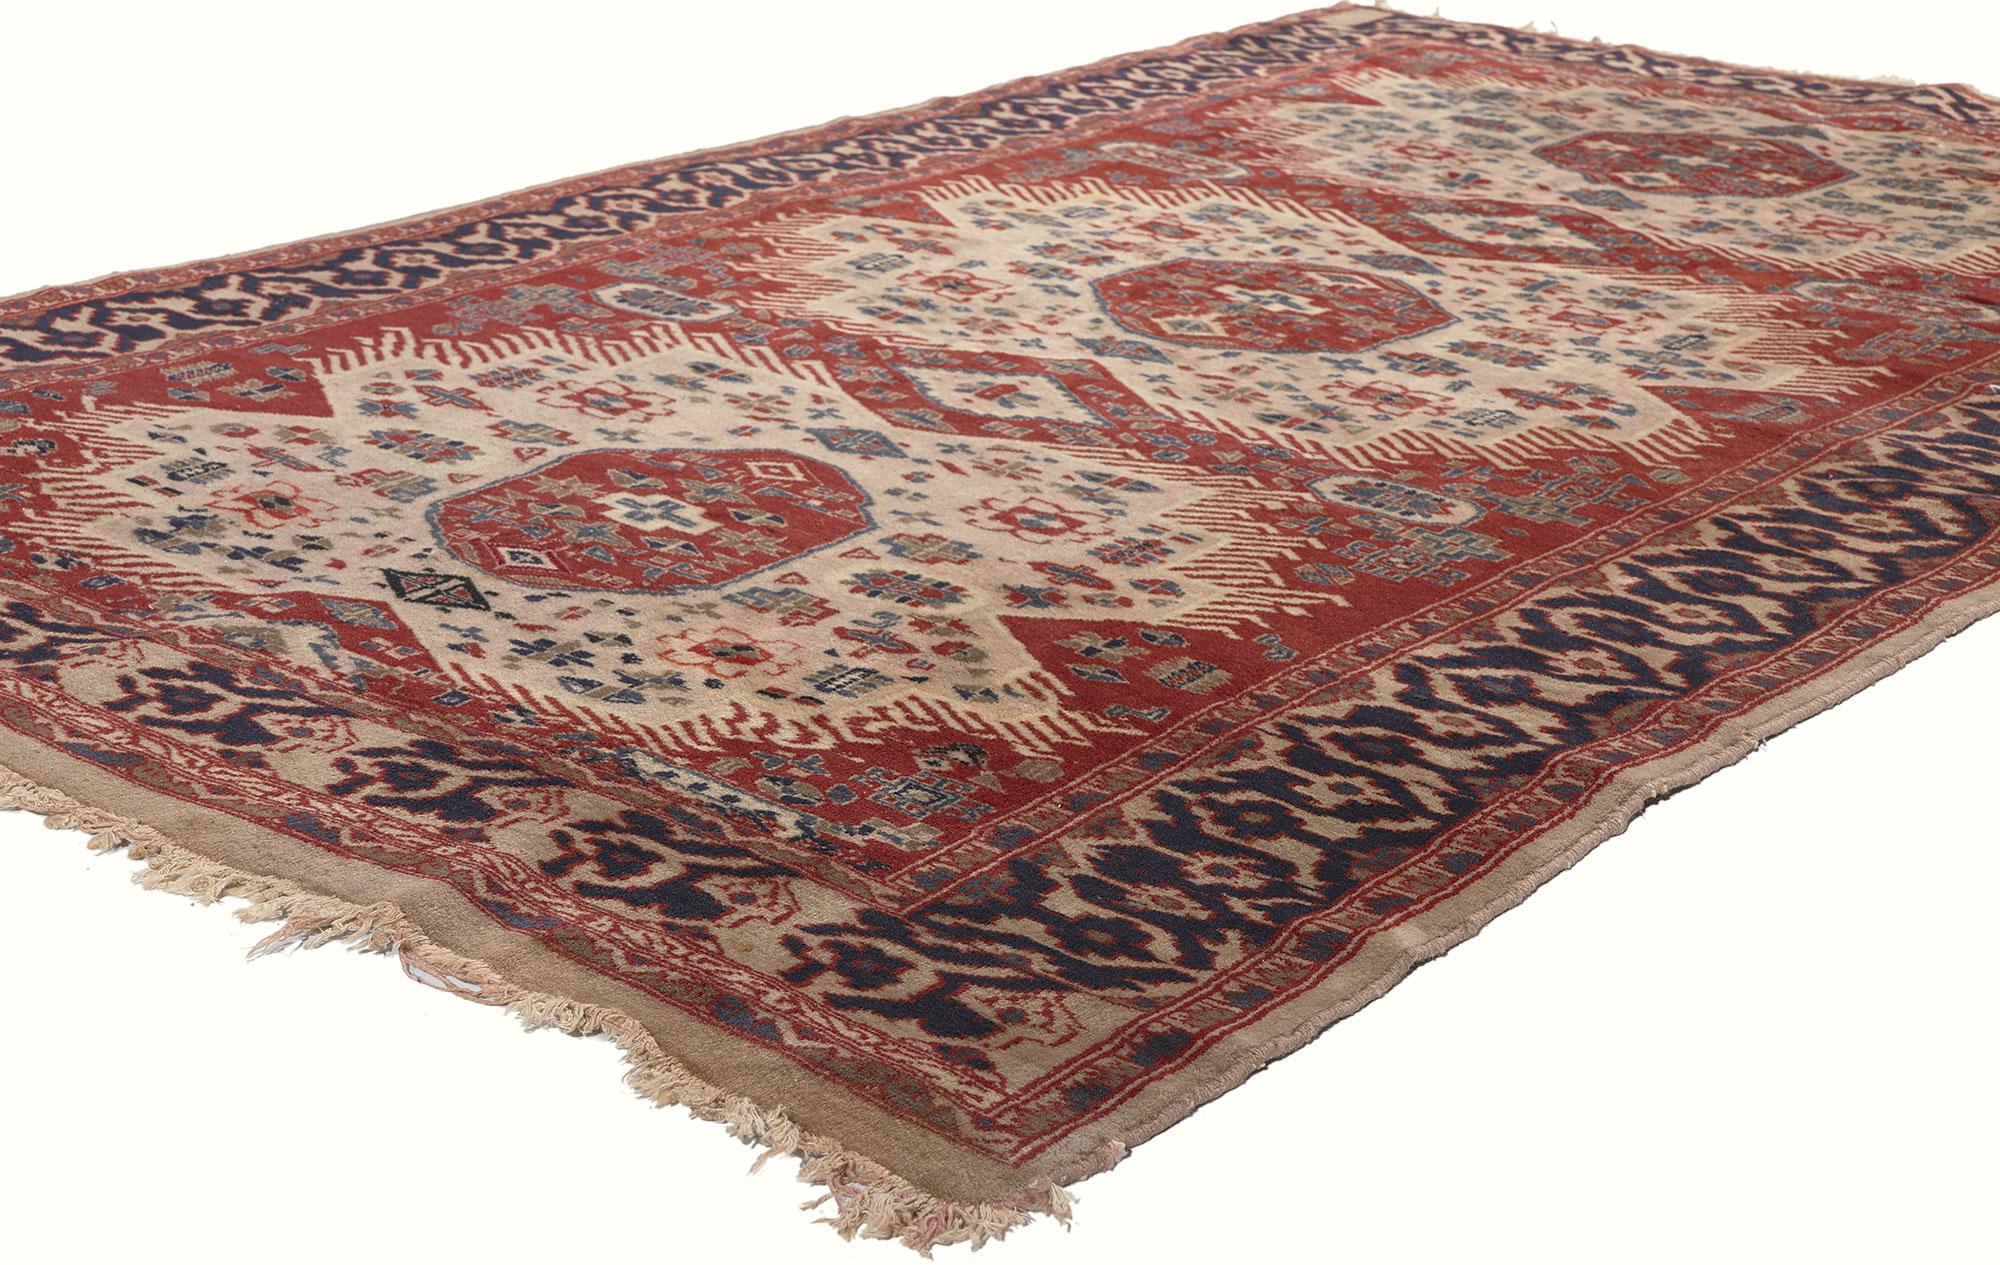 78712 Vintage Pakistani Kazak Rug, 04'02 x 06'04. Pakistani Kazak rugs are handwoven rugs crafted in Pakistan, drawing inspiration from traditional Kazak rugs of the Caucasus region. They feature bold geometric patterns, vibrant colors, and motifs